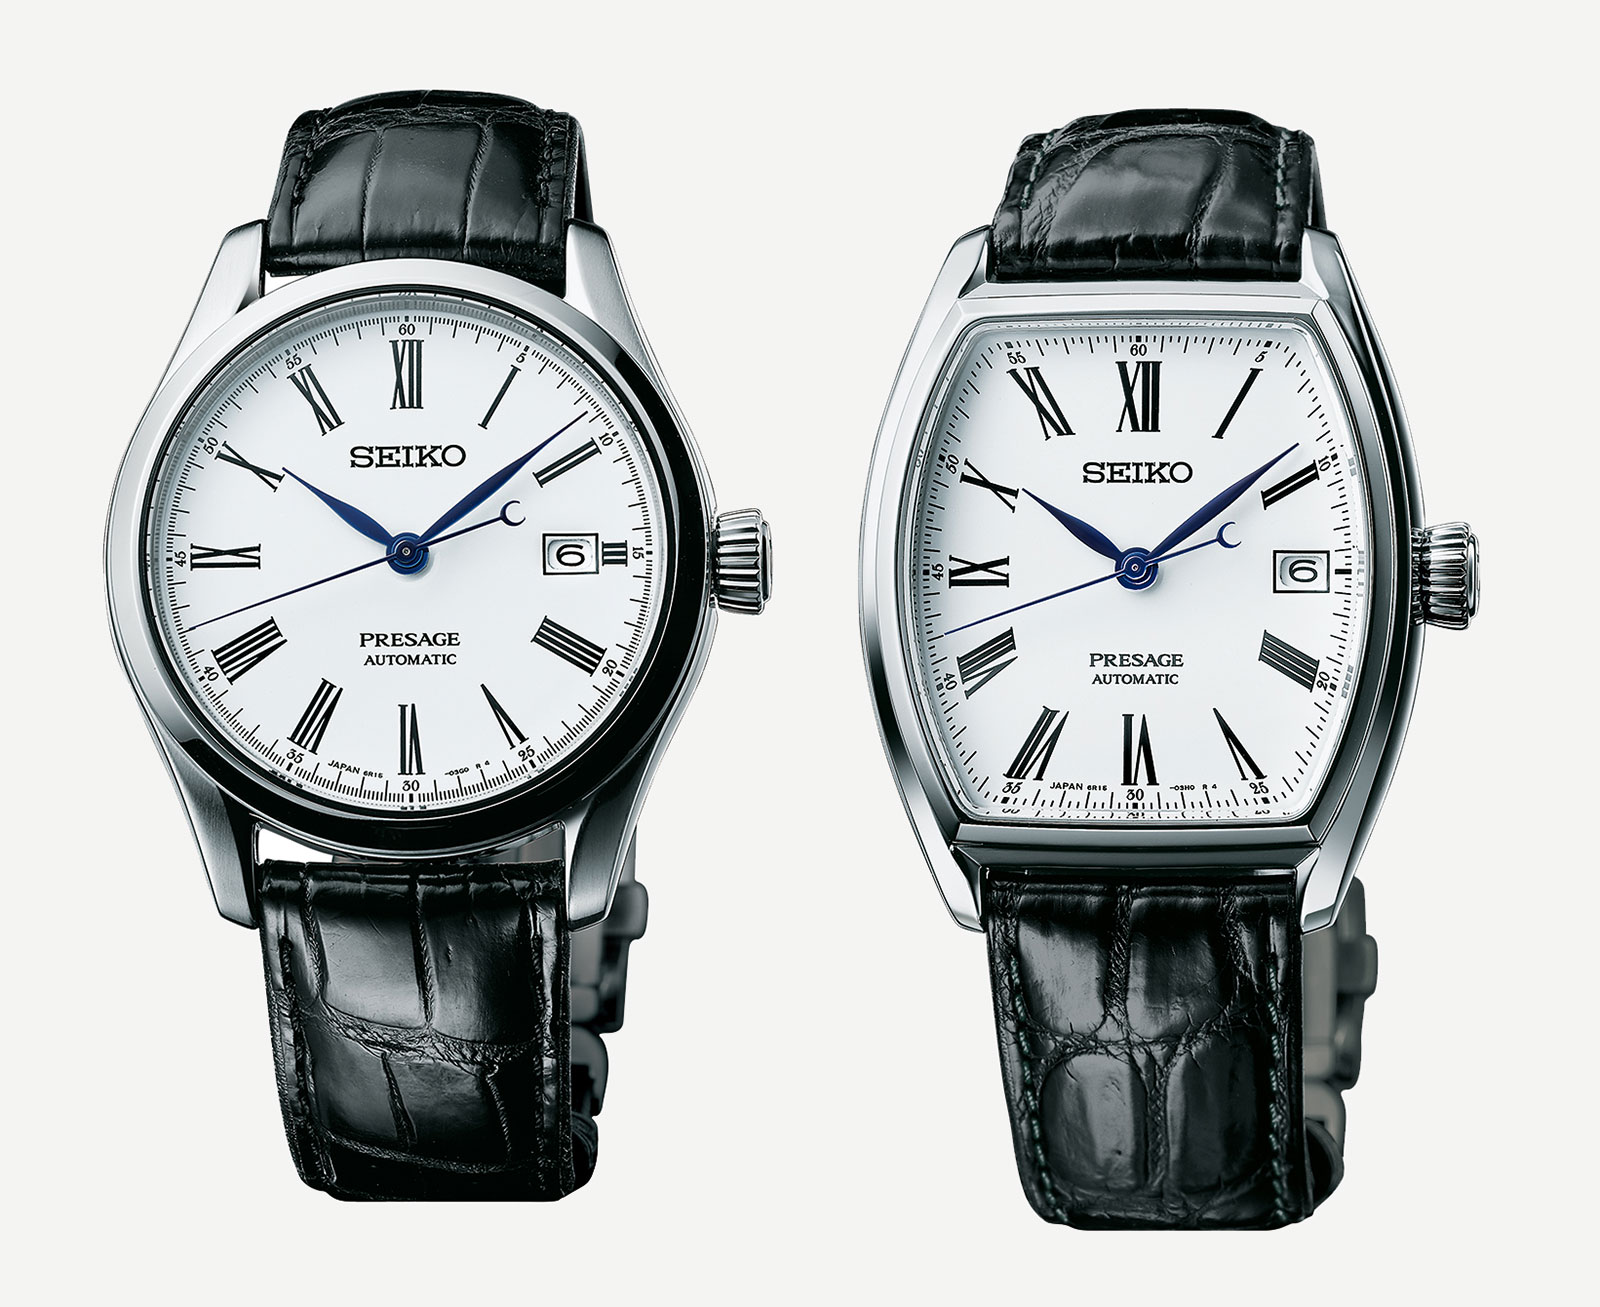 Baselworld 2017: Seiko Introduces the Presage Fired Enamel Dial Collection  | SJX Watches